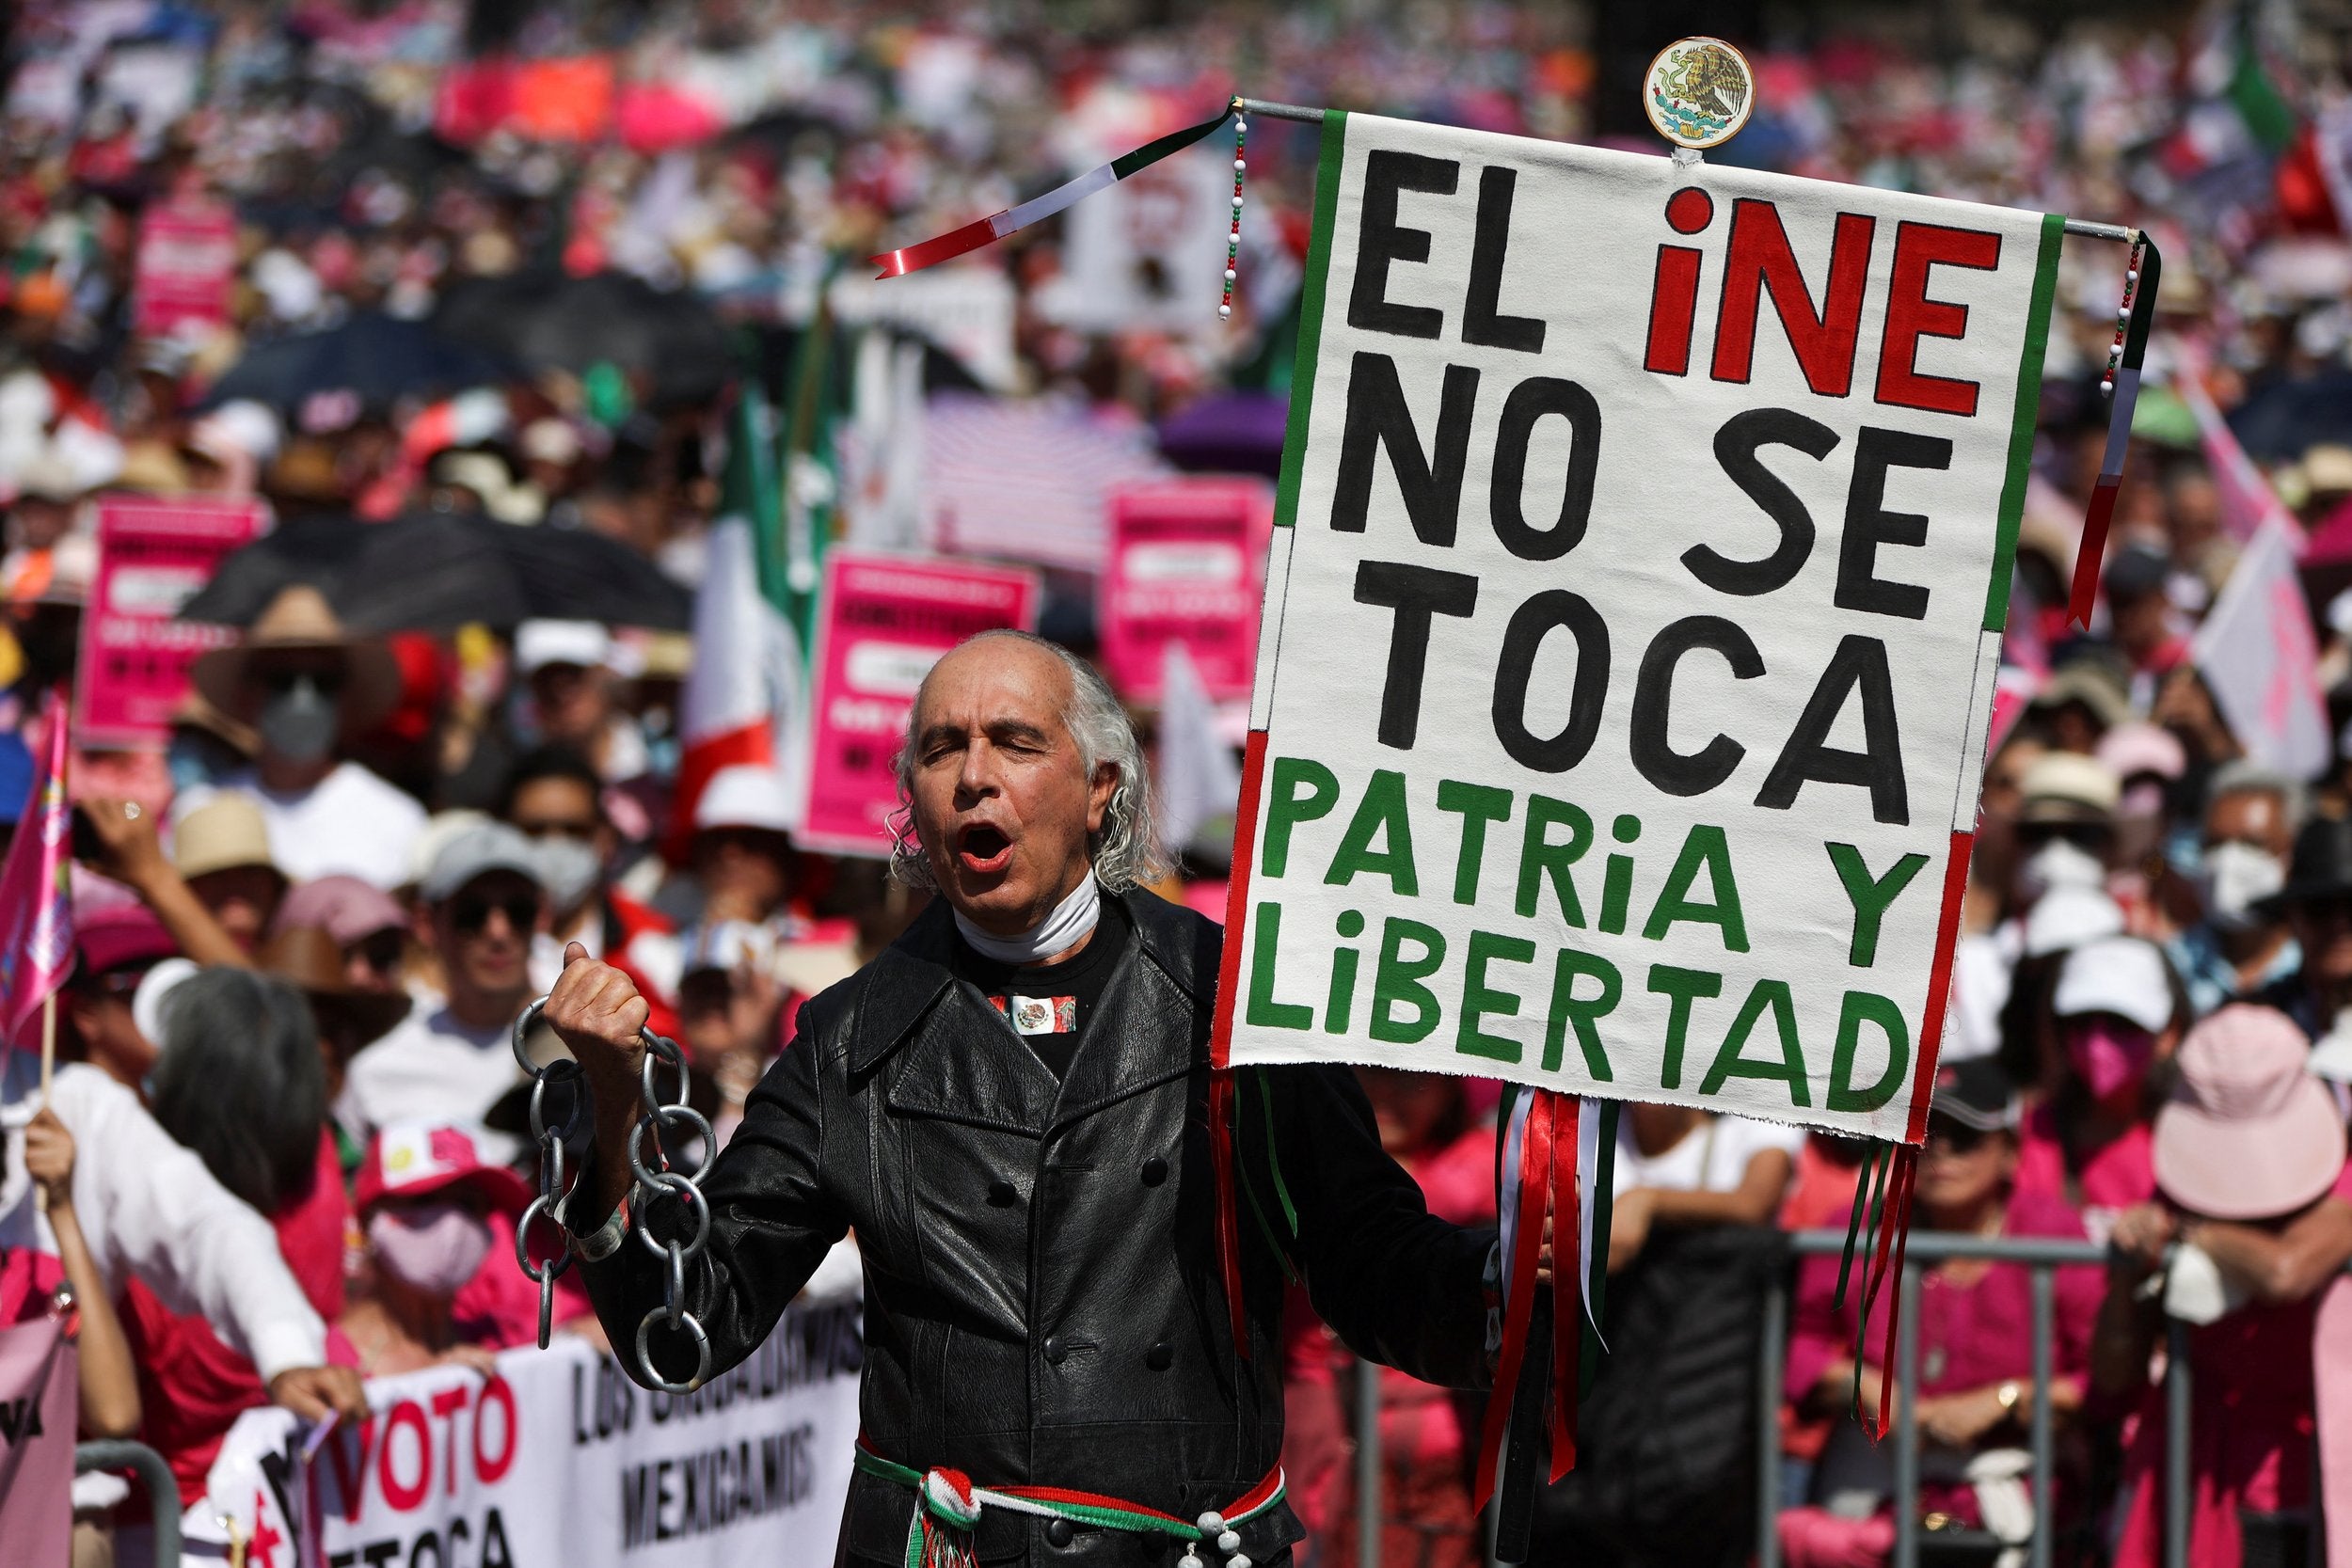 Thousands of Mexicans protest electoral overhaul, see democracy at risk